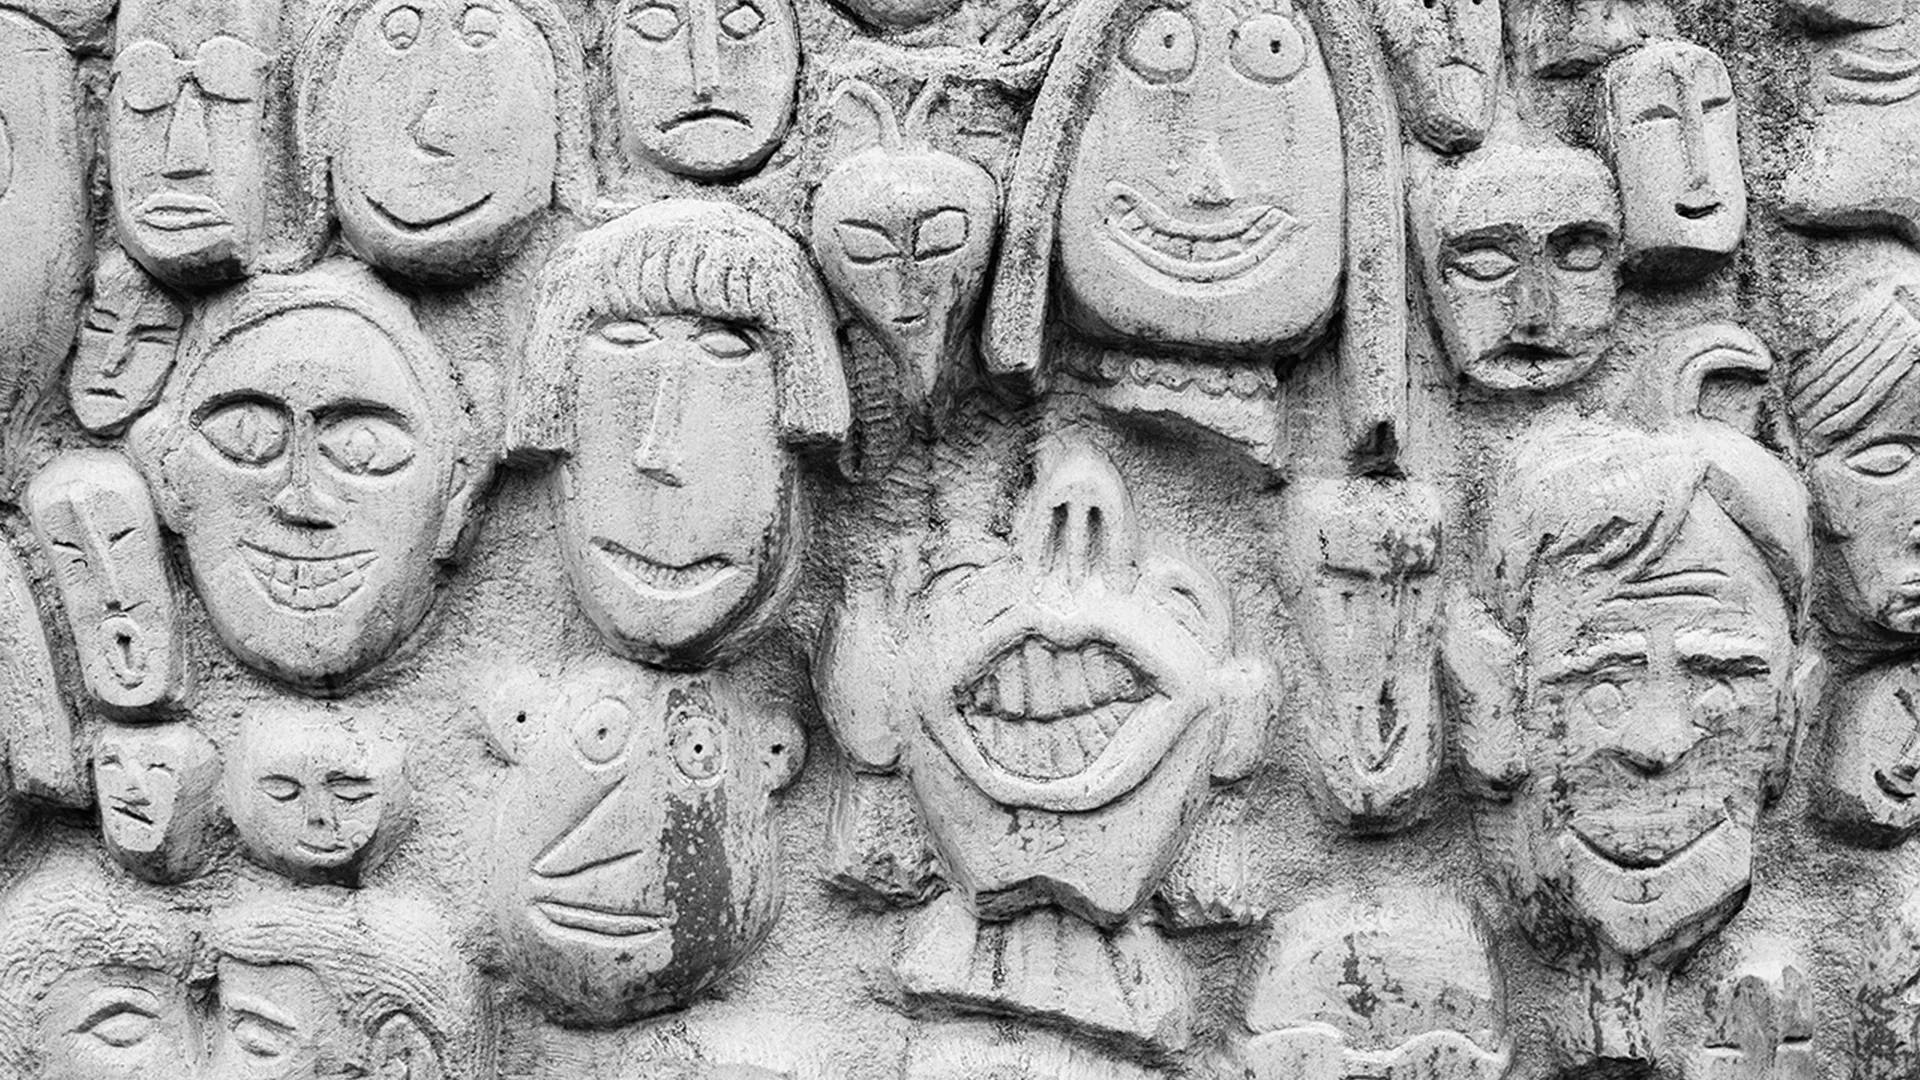 Smiling faces carved into concrete wall